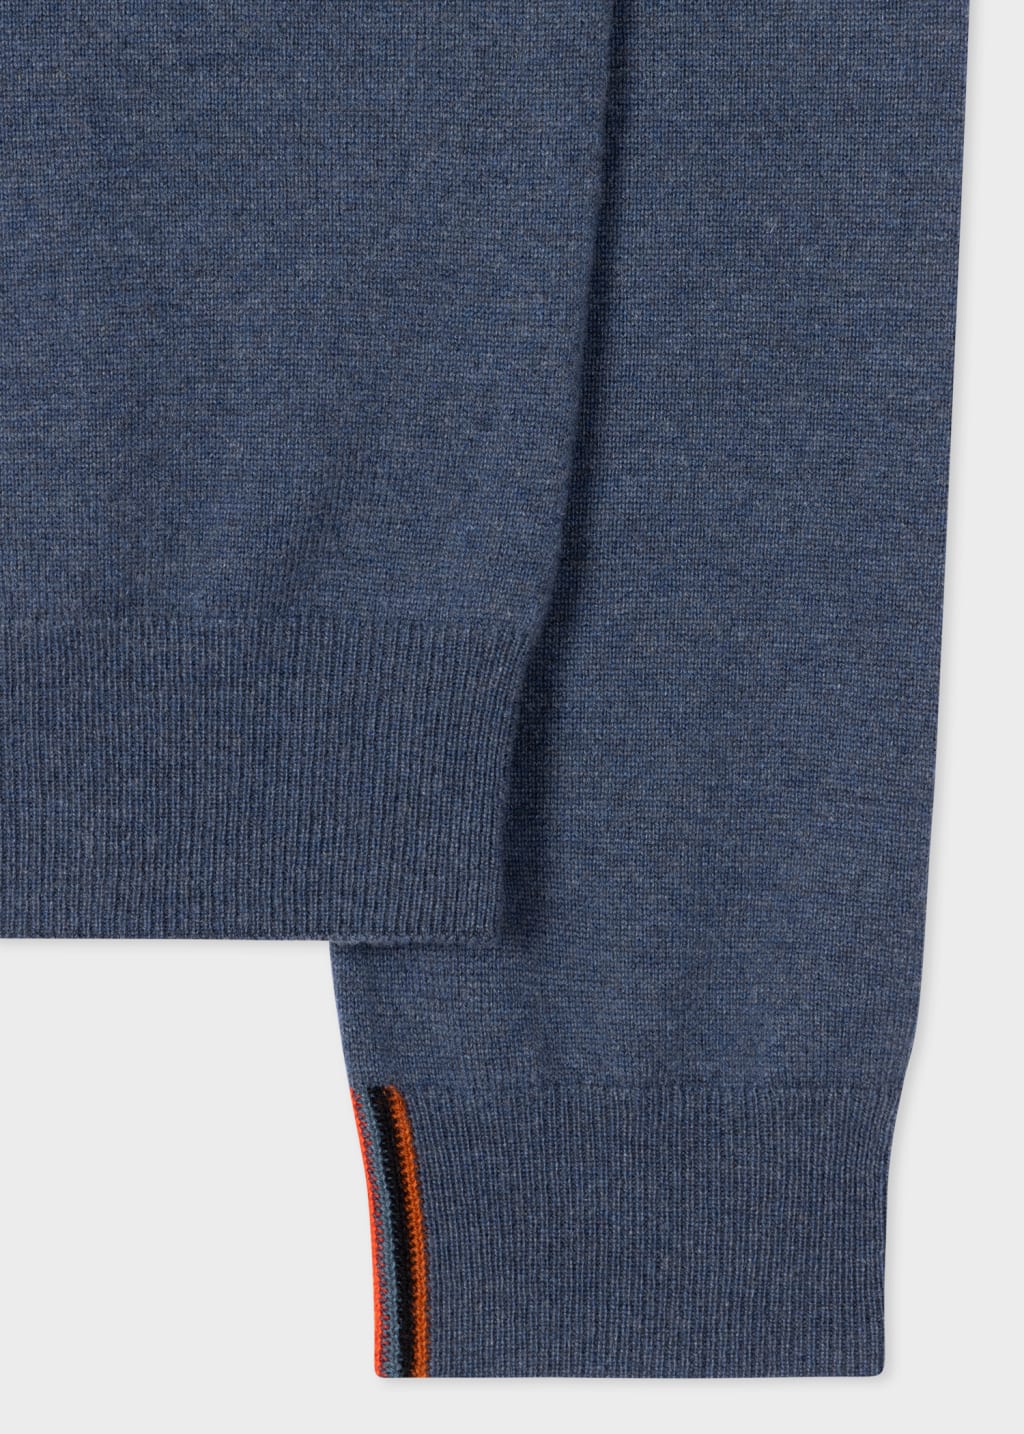 Detail View - Slate Blue Cashmere Zip-Neck Sweater Paul Smith